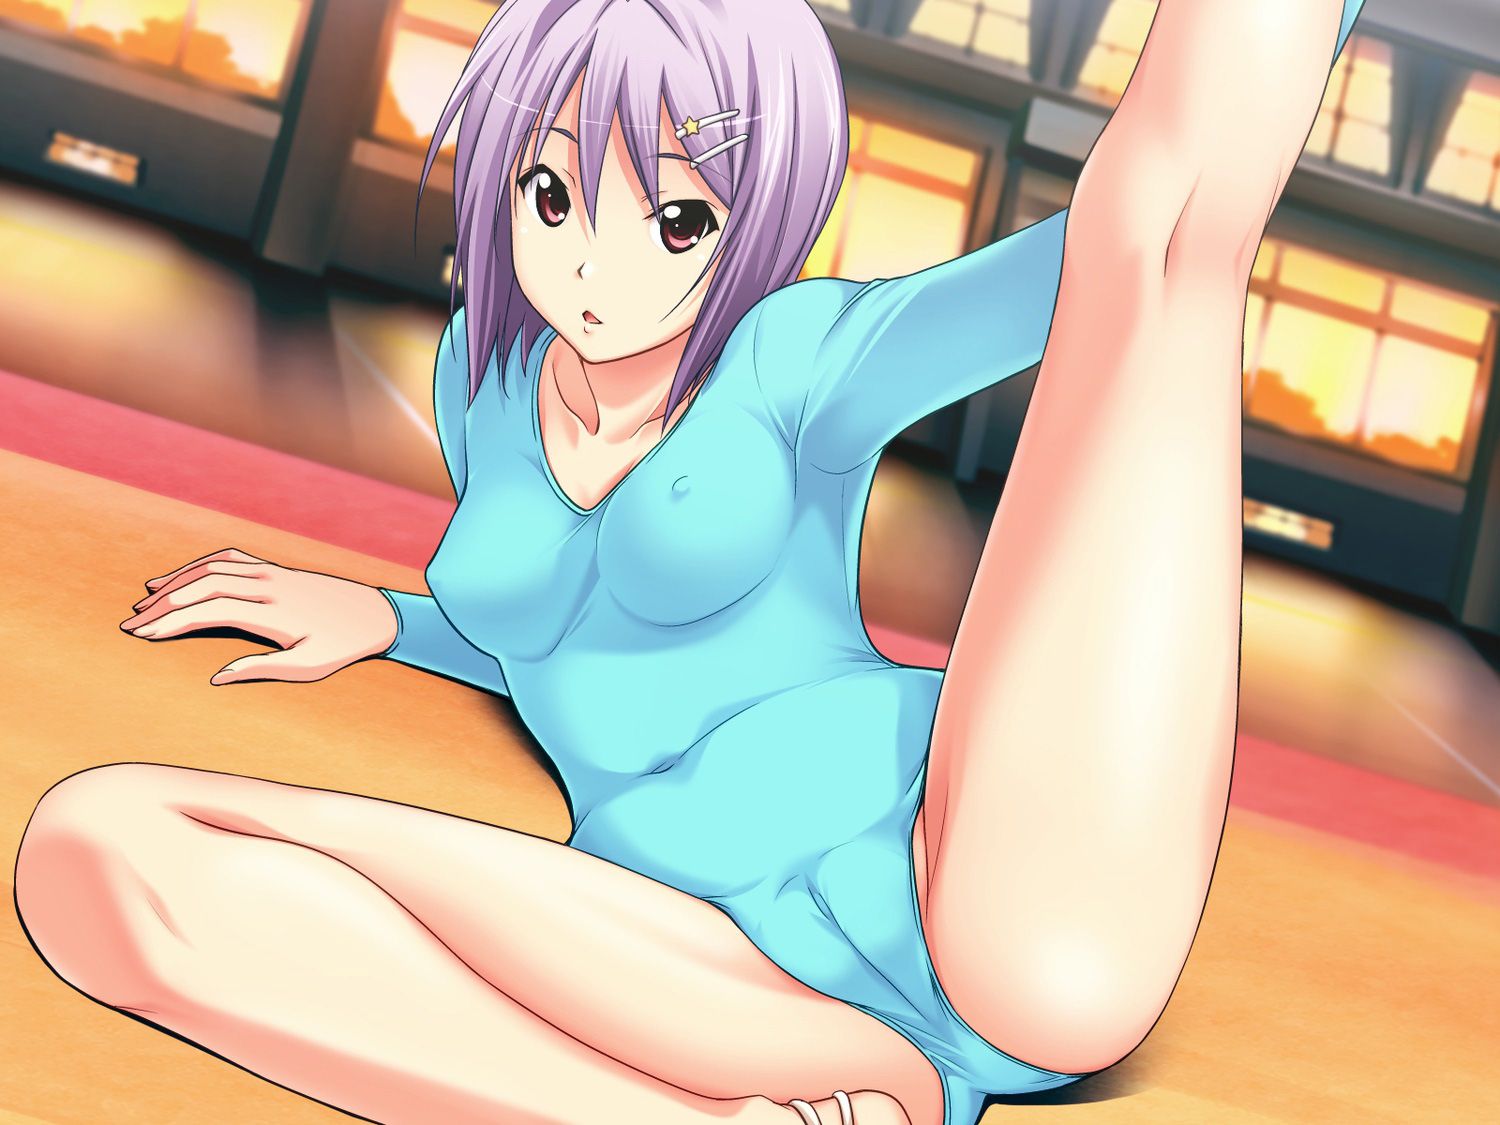 The secondary image of a girl in a leotard 3 50 pieces [Ero/non-erotic] 4